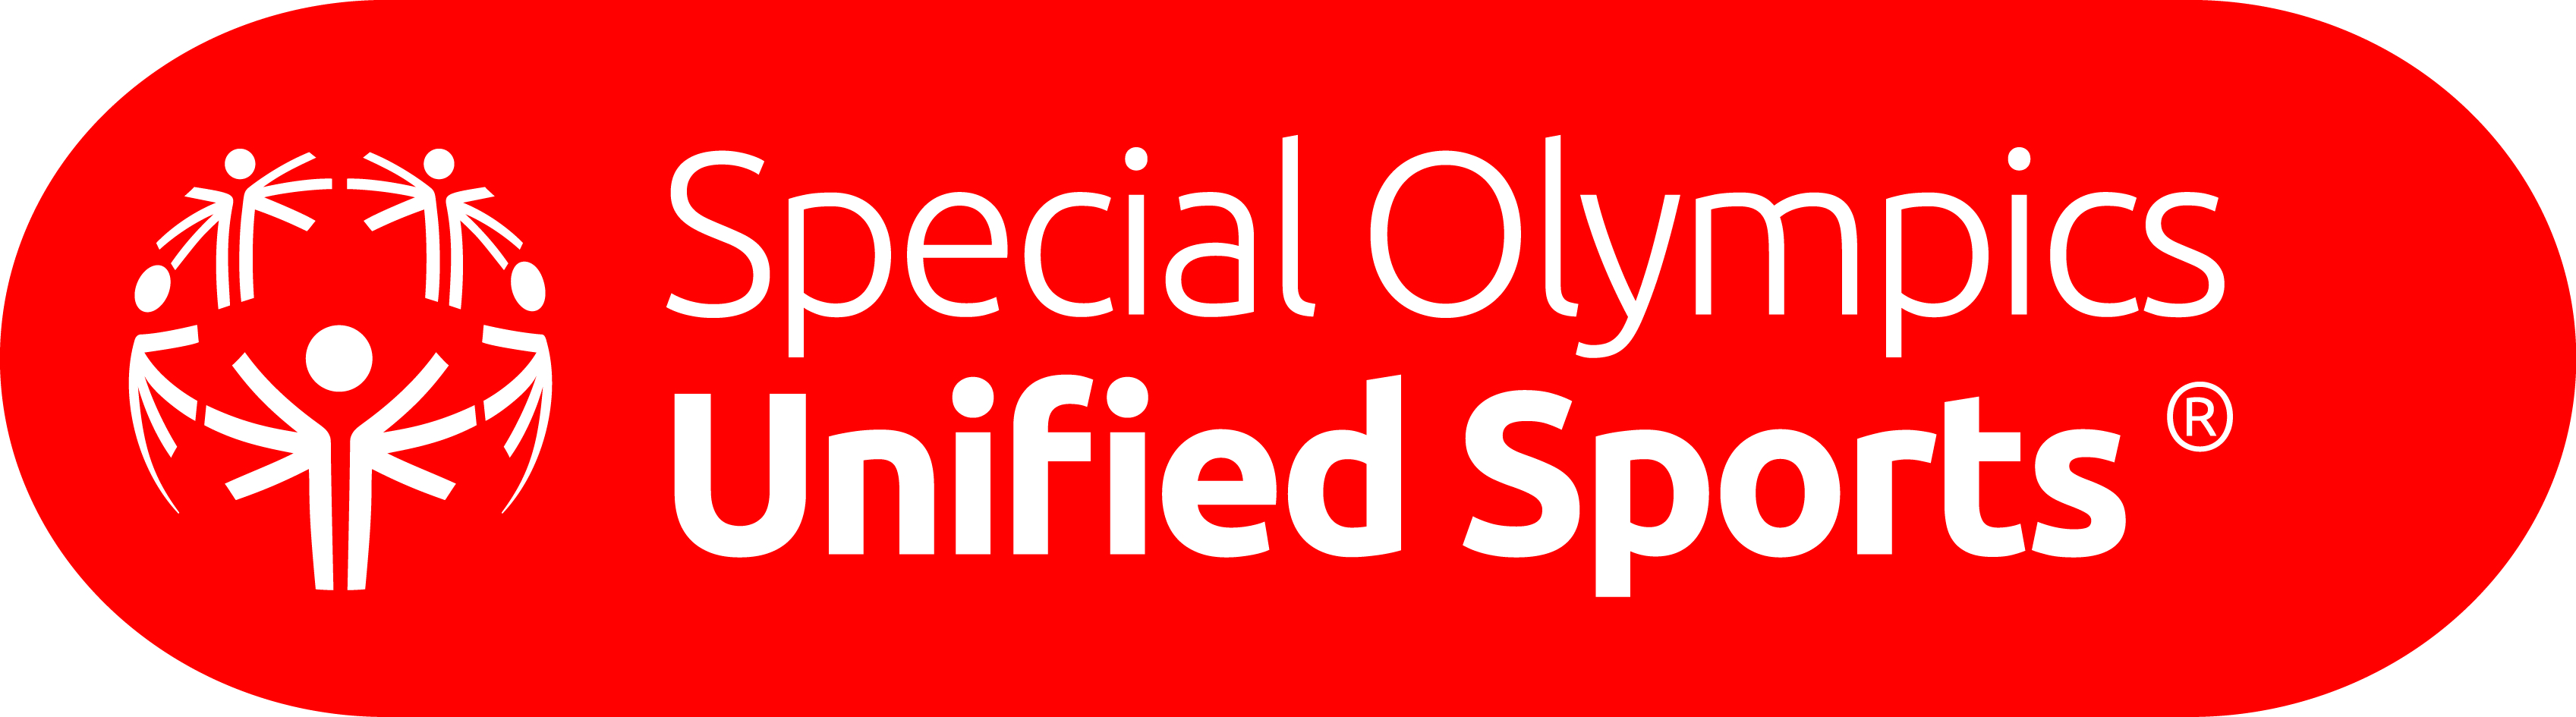 SO Unified-Sports Lozenge Red